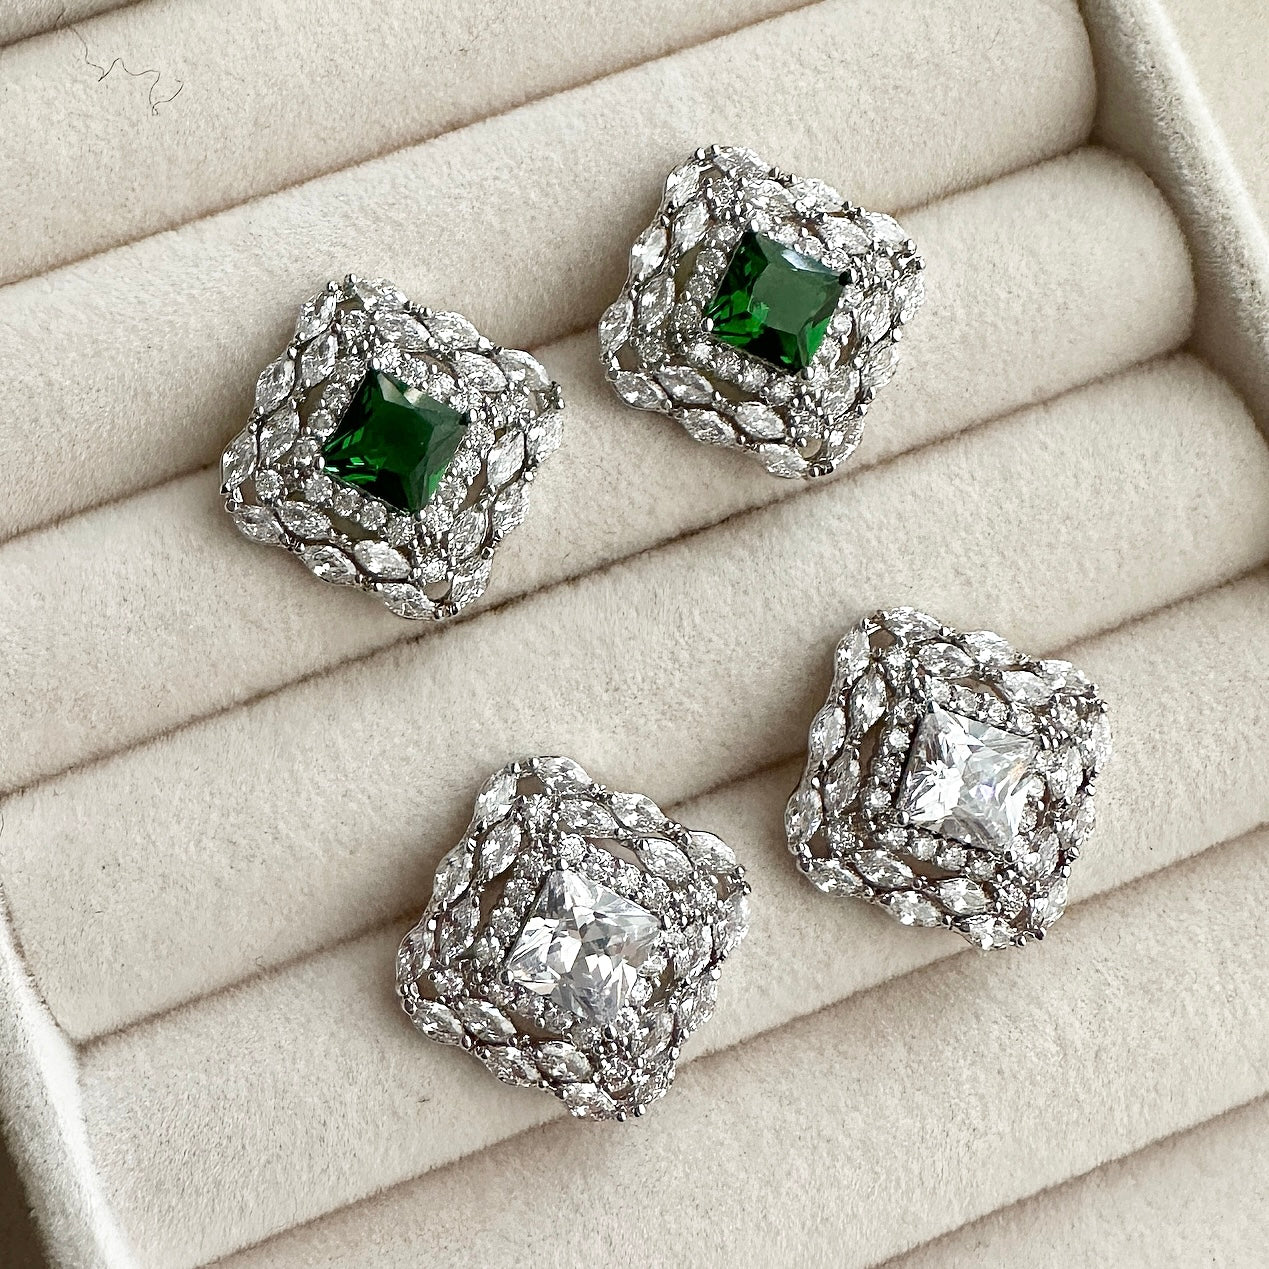 Add a touch of luxury to any ensemble with the Maiya Crystal Earrings. Embellished with dazzling cz crystals crafted in two shades, green and crystal, these earrings will bring a hint of glamour to any outfit. A beautiful adornment for any special occasion. Earring drop 2x2cm